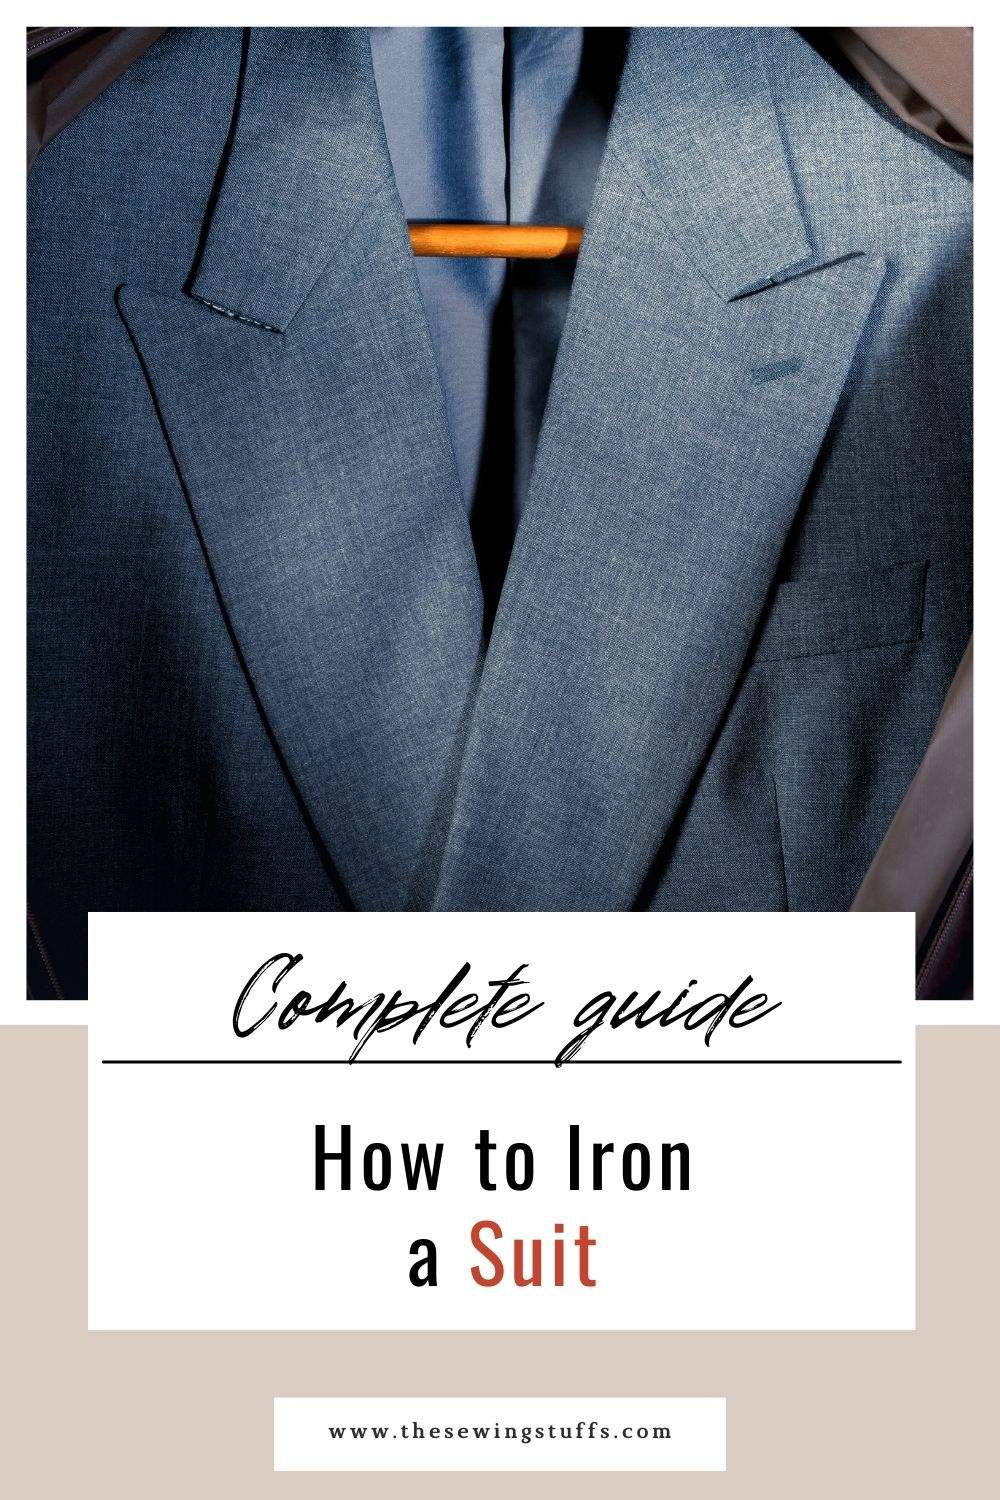 Can you iron a suit